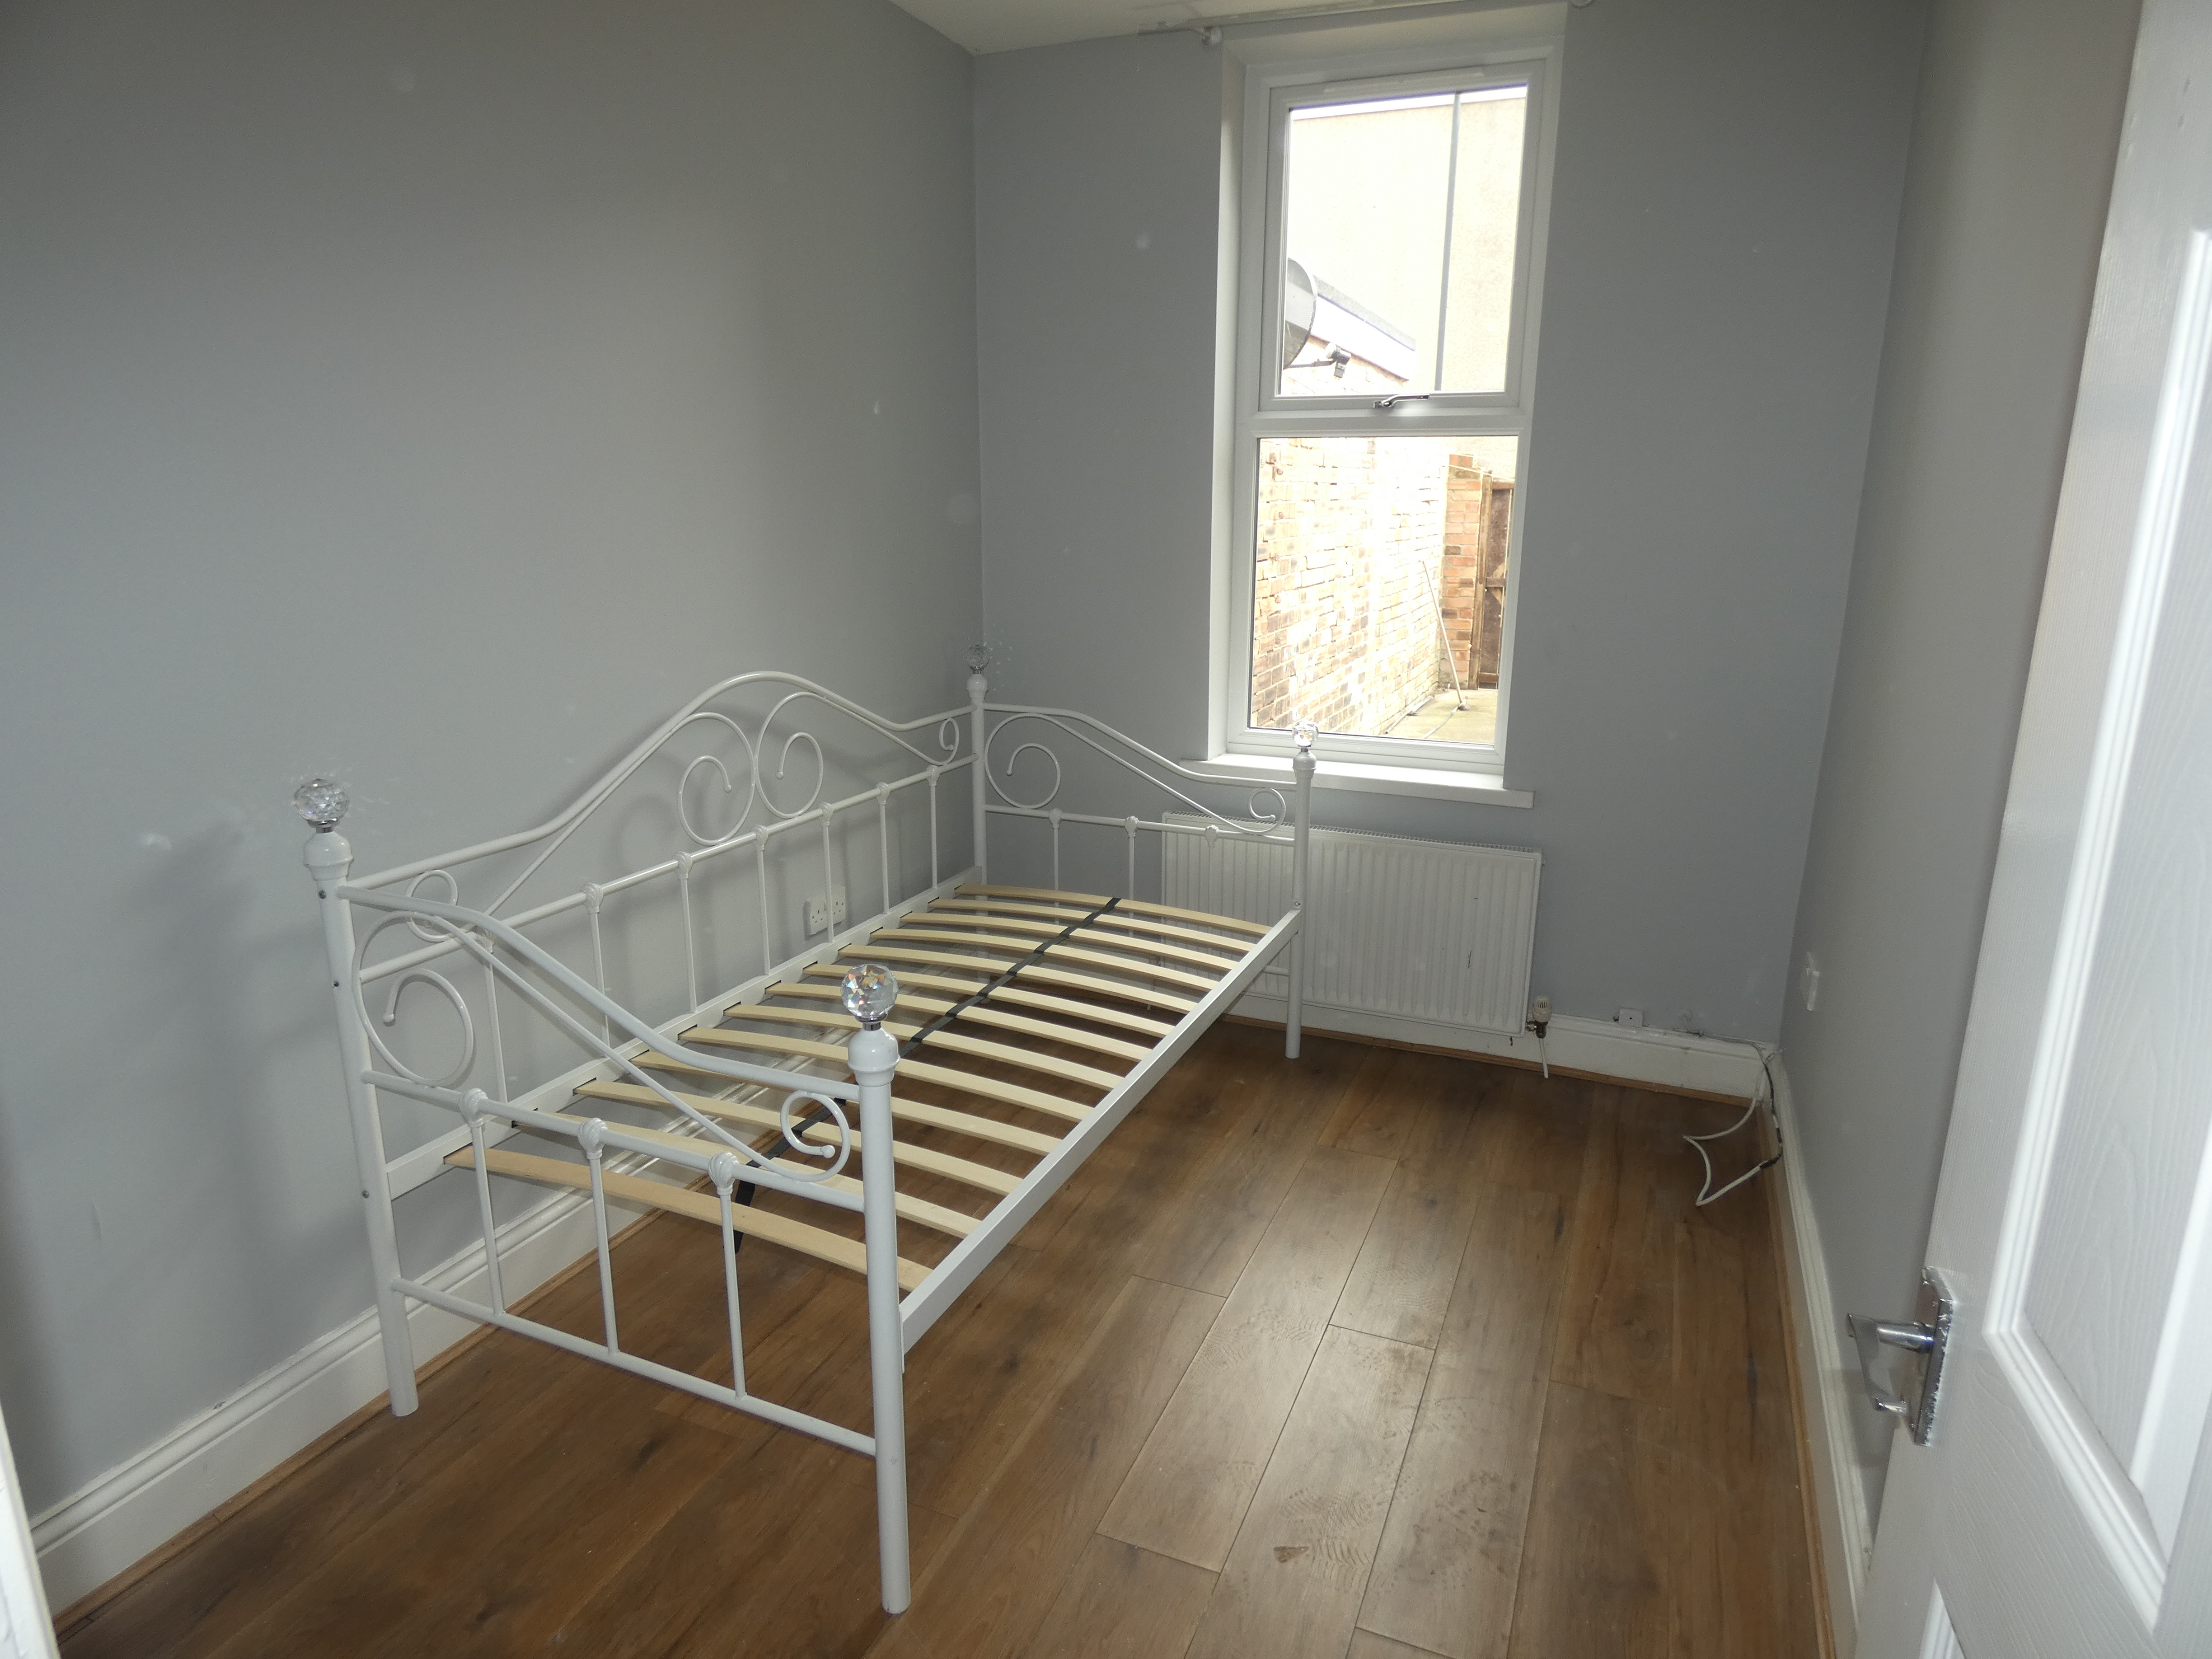 2 bed flat to rent in Hazlerigg, Newcastle upon tyne  - Property Image 4